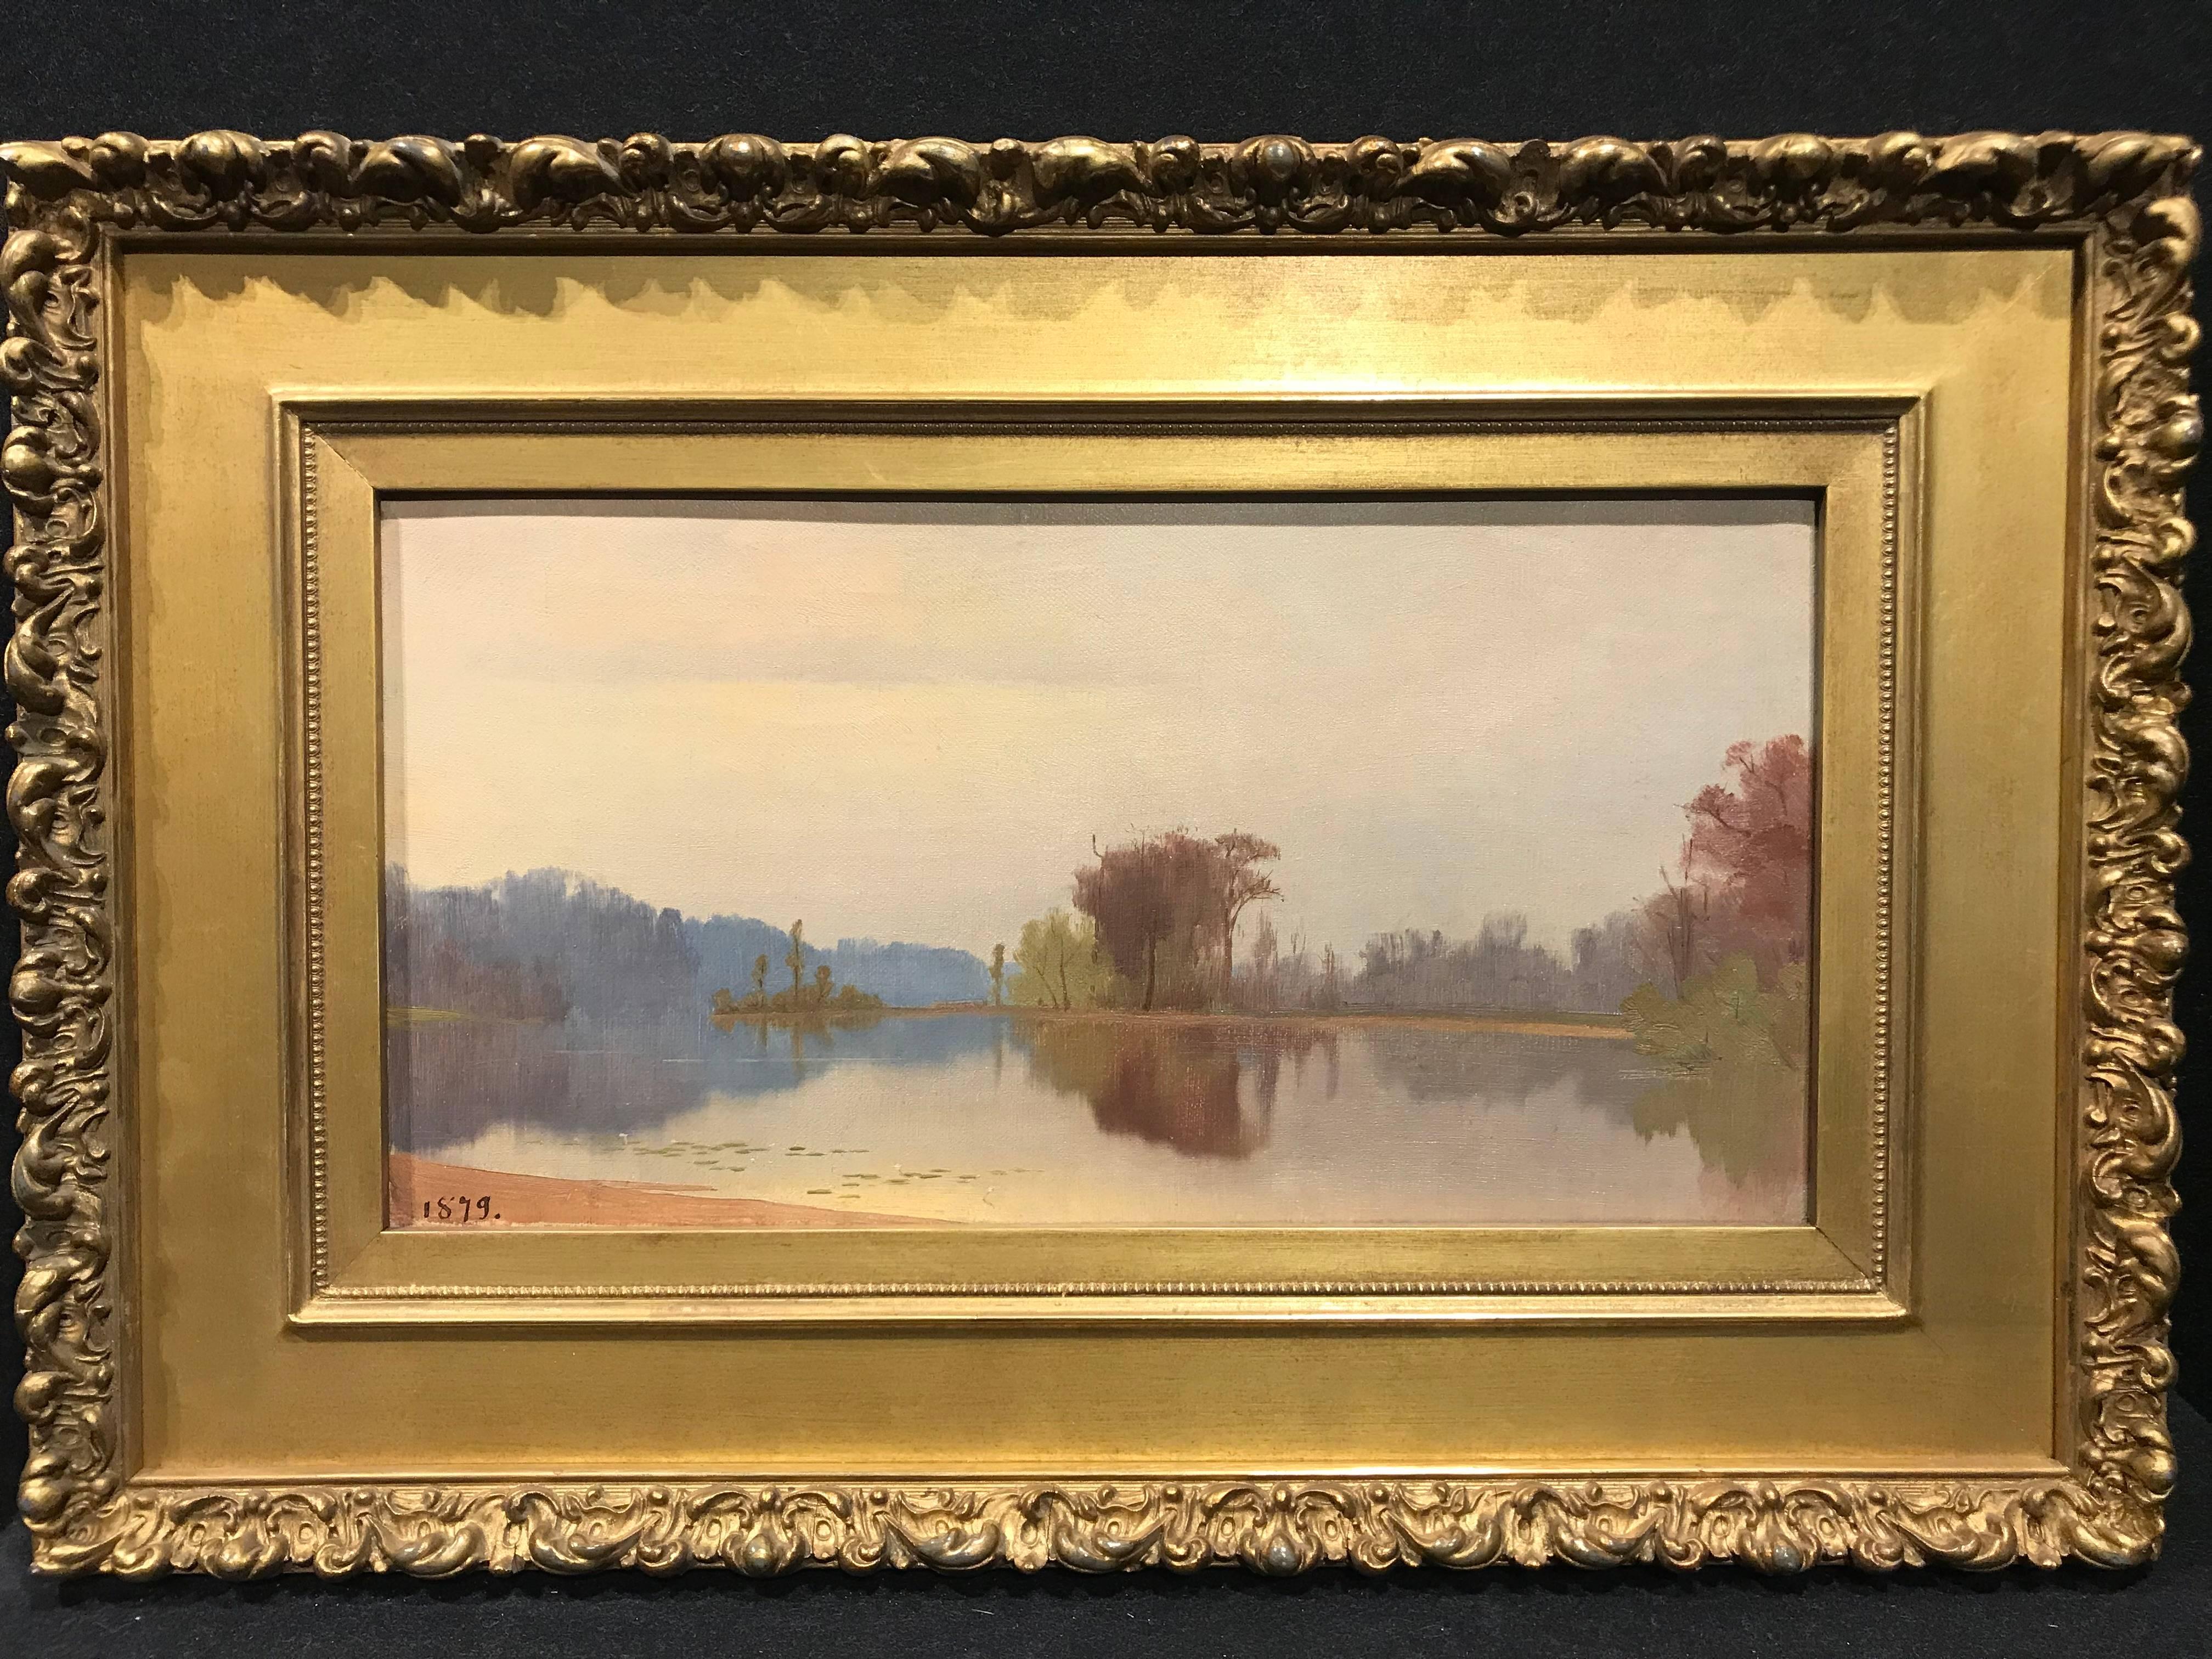 This is a rare early example of John Severinus Conway’s work in oil on canvas. It is a premier coup sketch, done on-site, which fully manifests his subtle use of color and brushwork to elicit his experience of the Lake on a calm summer afternoon.